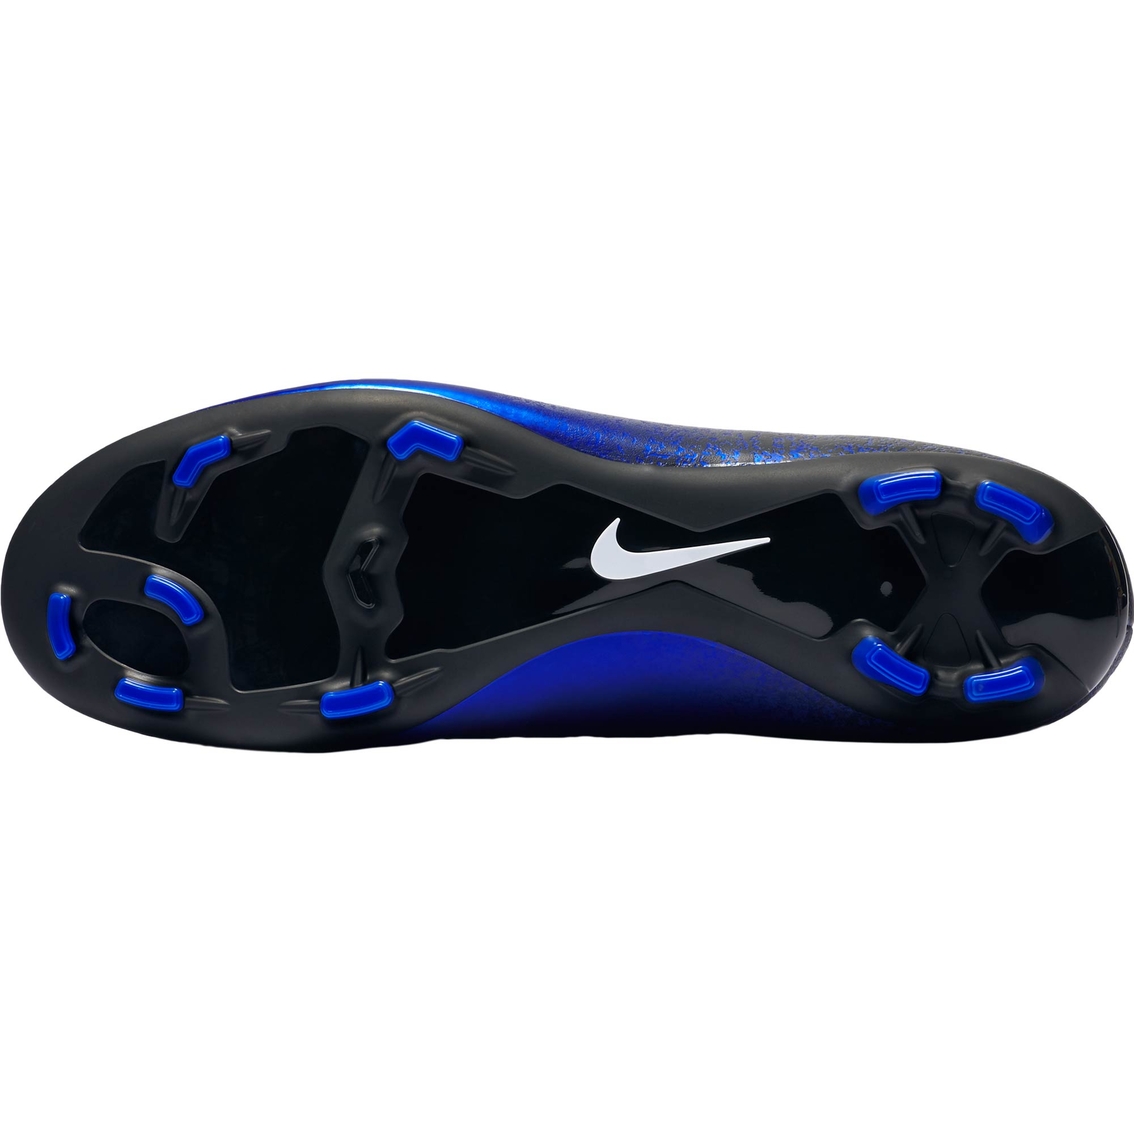 Nike Men's Mercurial Victory V CR FG Soccer Cleats - Image 3 of 3